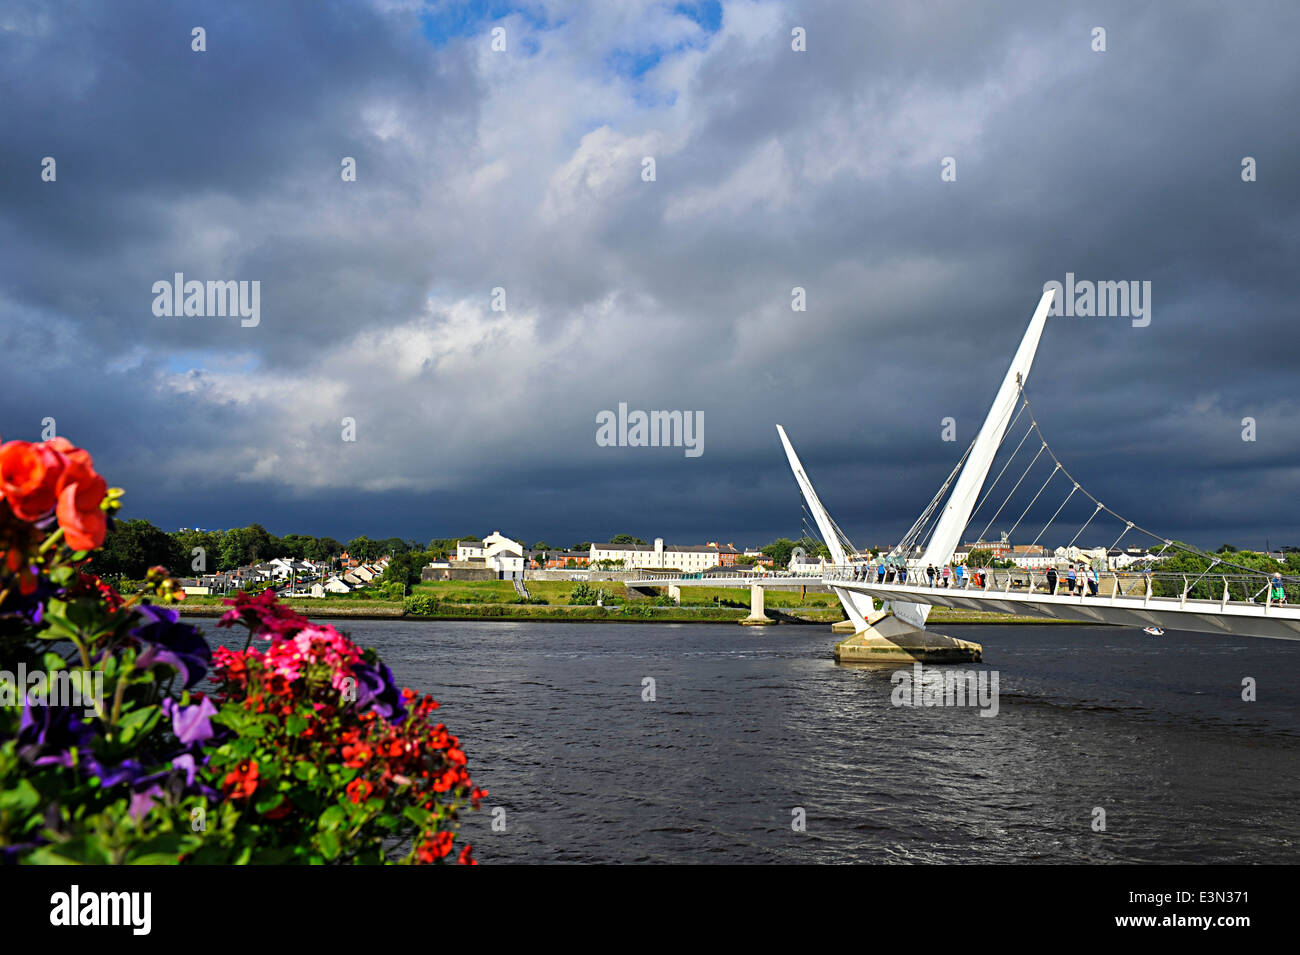 The Peace Bridge, Derry, Londonderry, Northern Ireland.Architect: Wilkinson Eyre Architects, 2011 Stock Photo